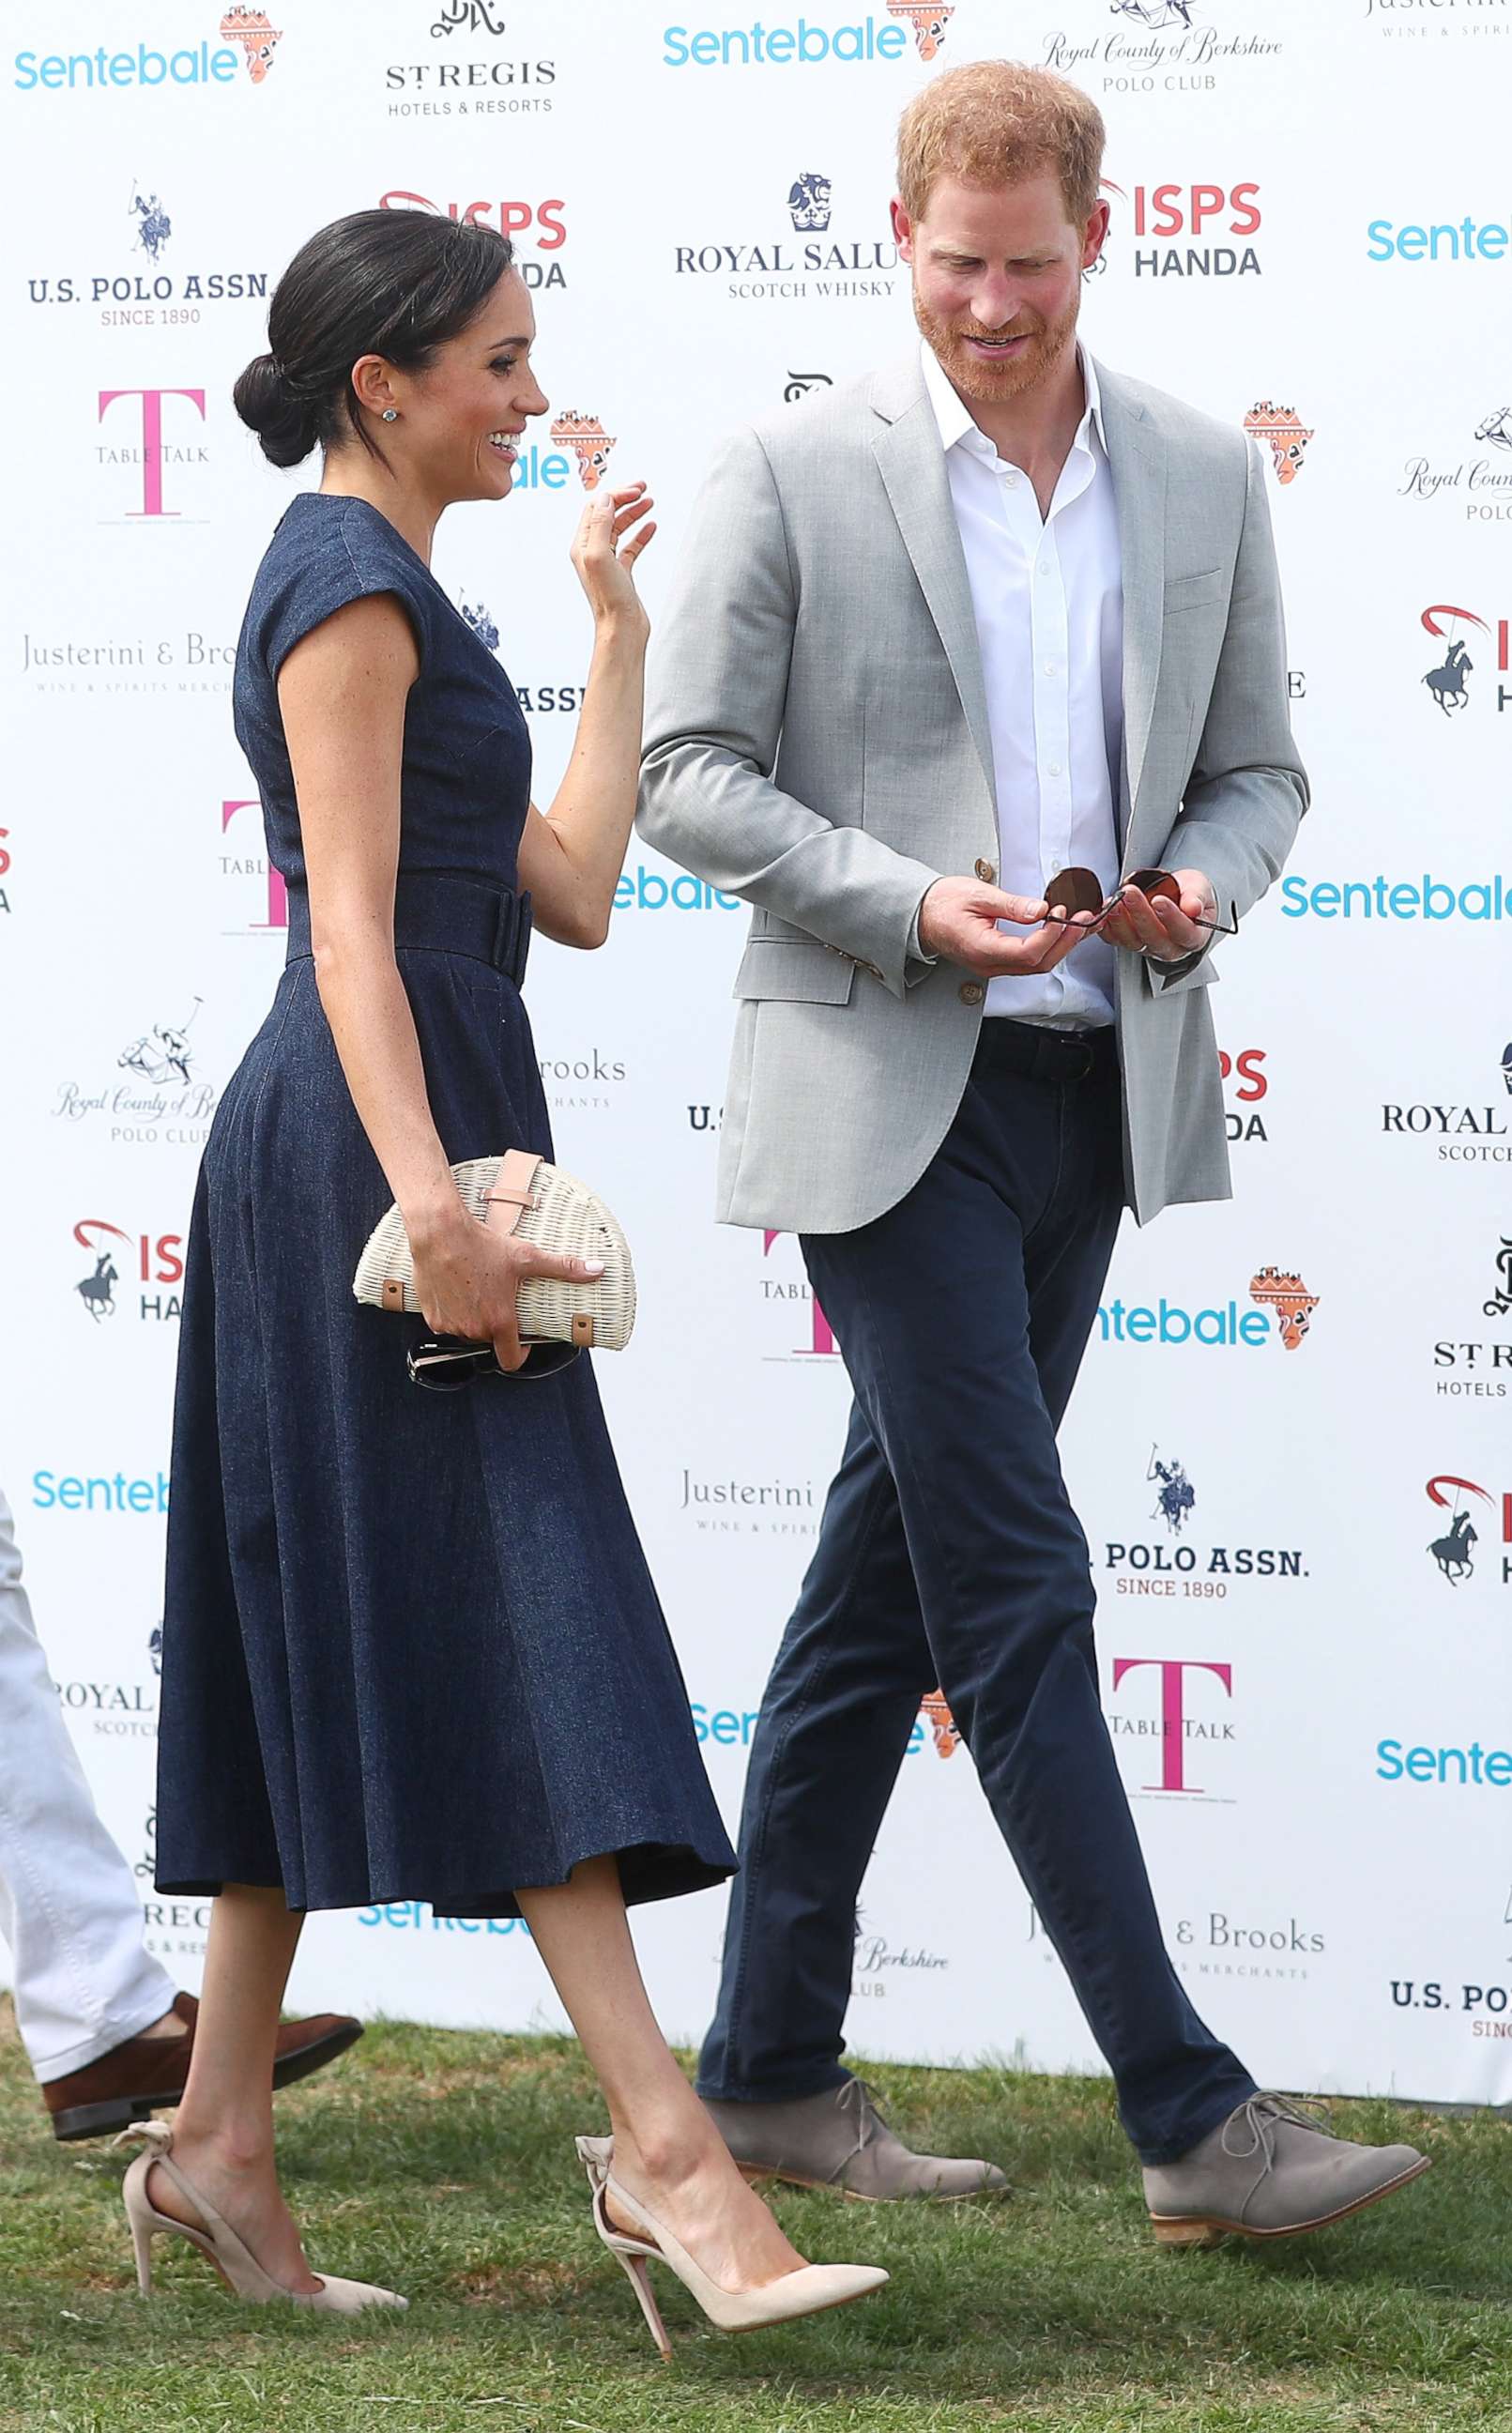 PHOTO: Britain's Prince Harry and Meghan the Duchess of Sussex arrive at a charity polo match in Windsor, July 26, 2018.